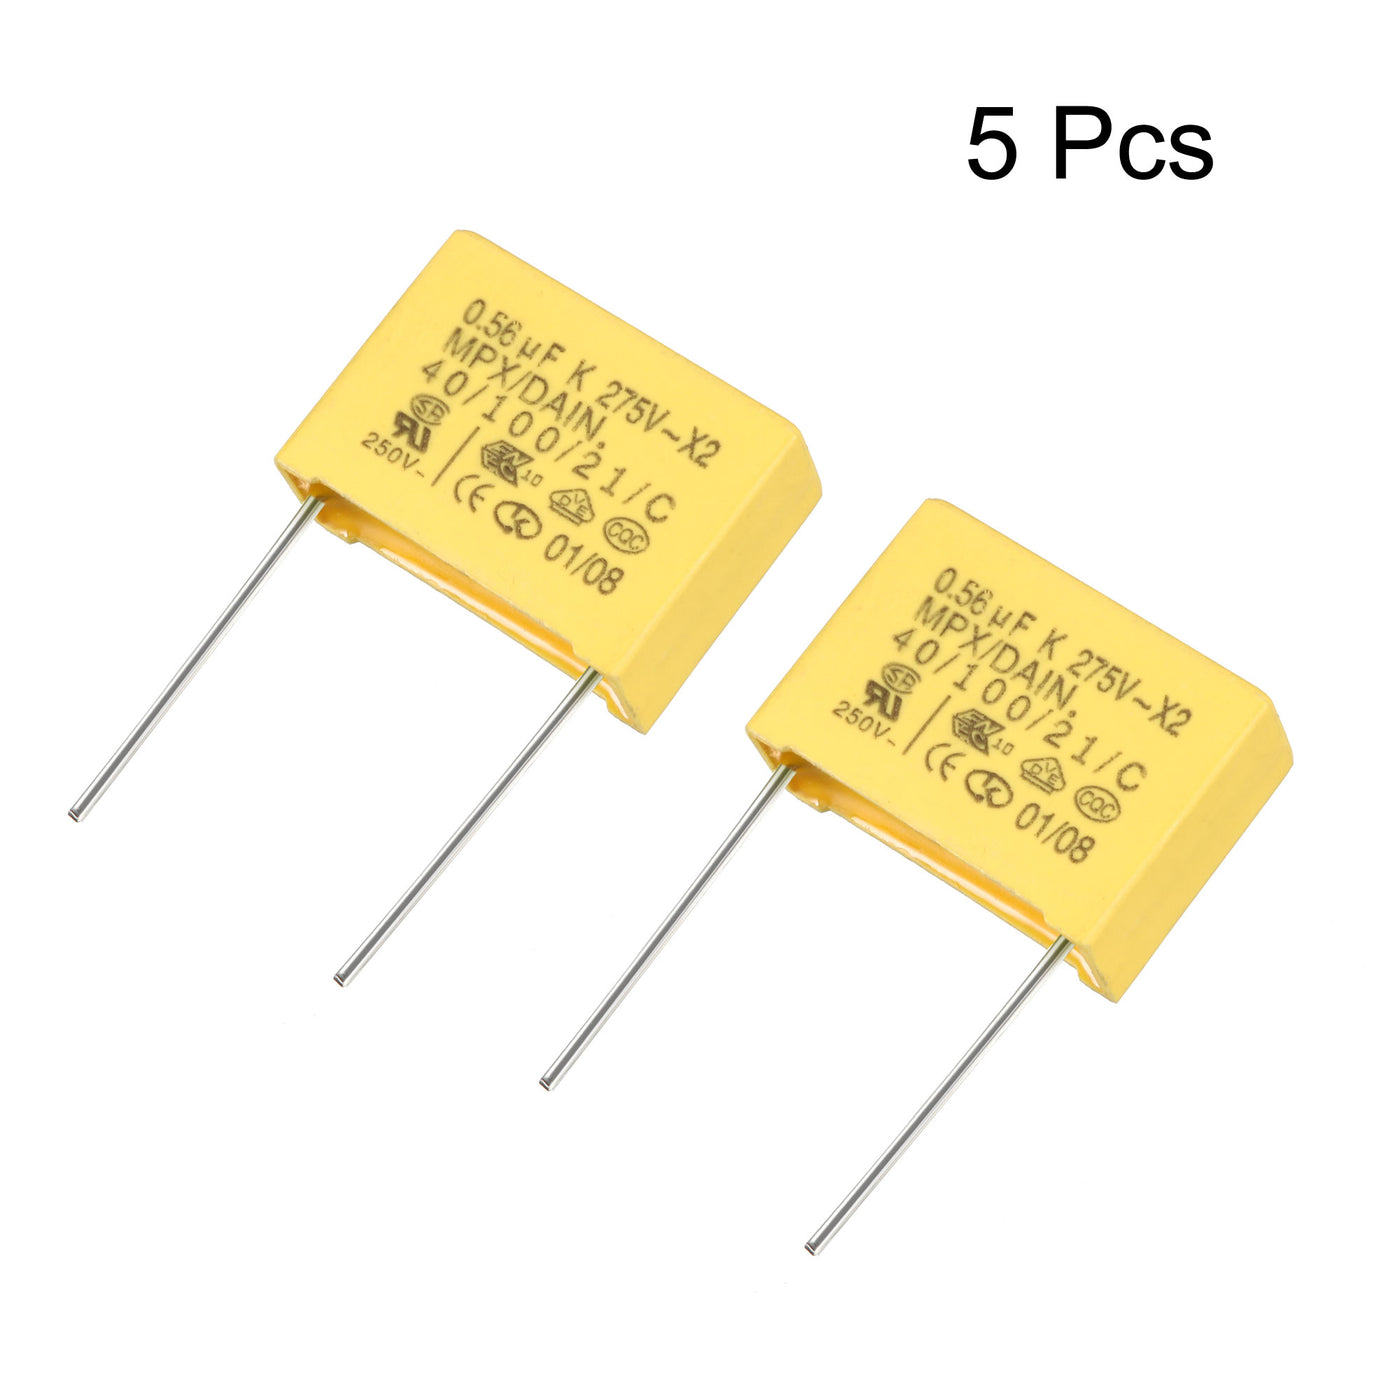 uxcell Uxcell Safety Capacitors Polypropylene Film 0.56uF 275VAC X2 MKP 5 Pcs